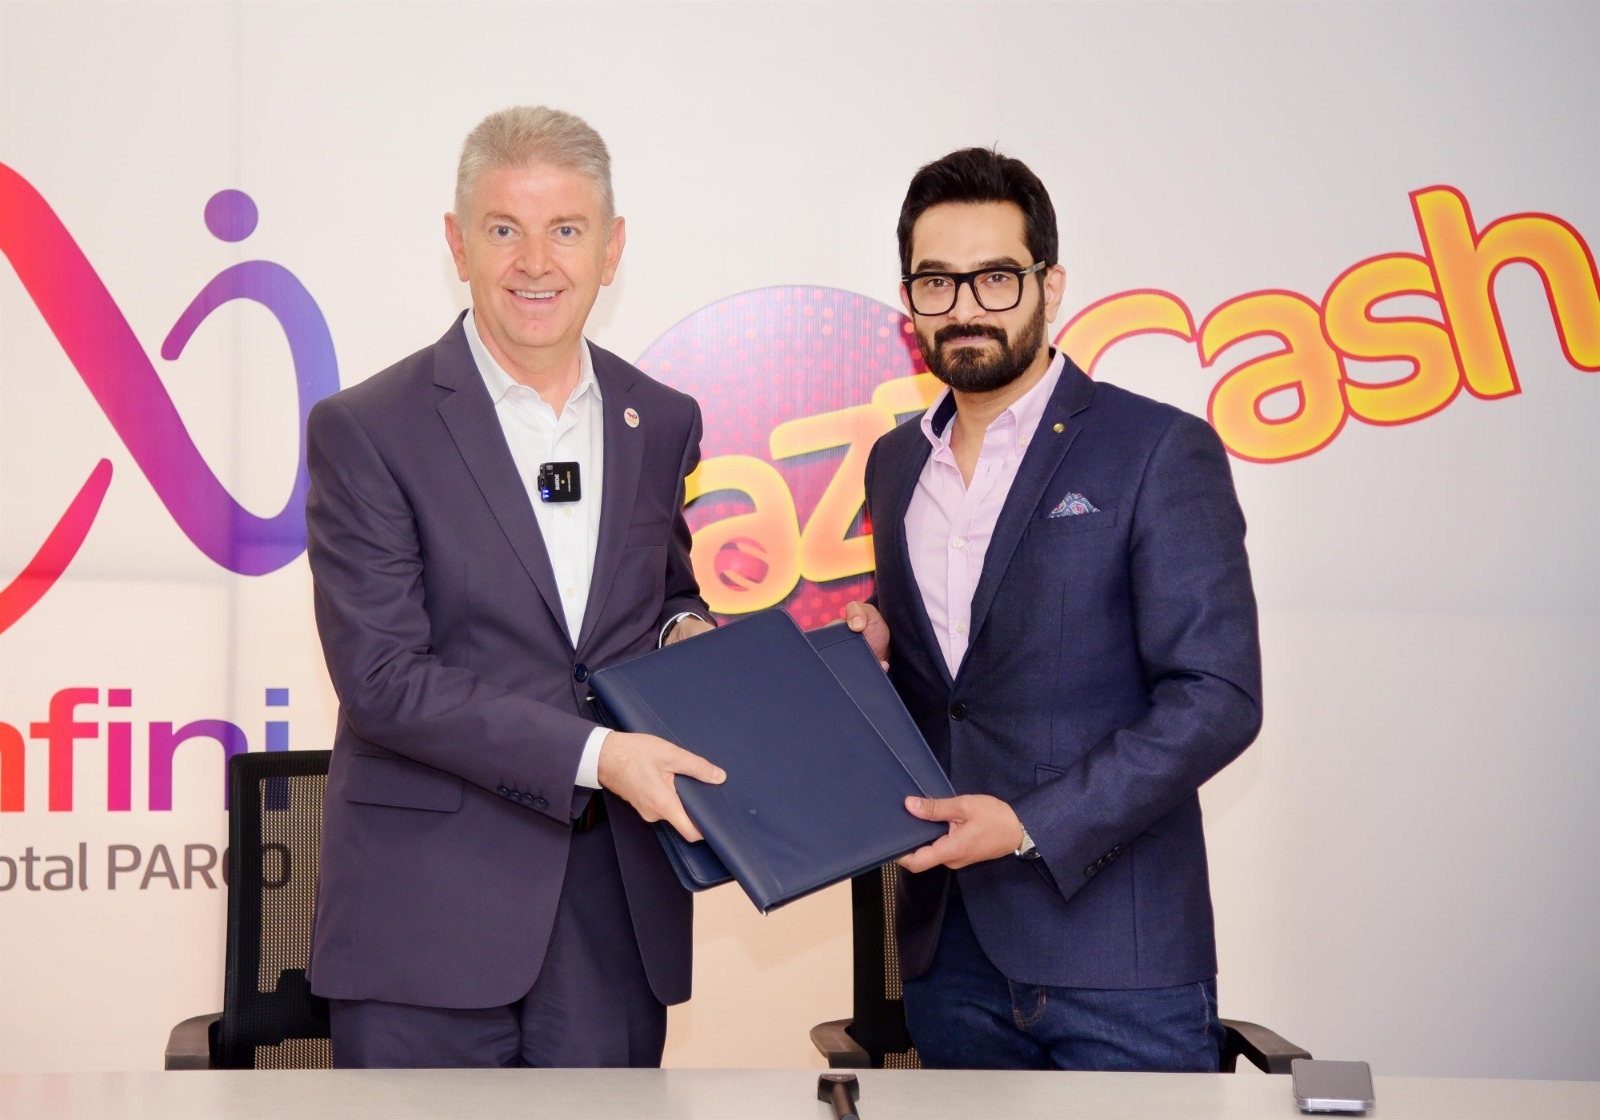 JazzCash and Total PARCO Partner to Set New Benchmarks for Convenience